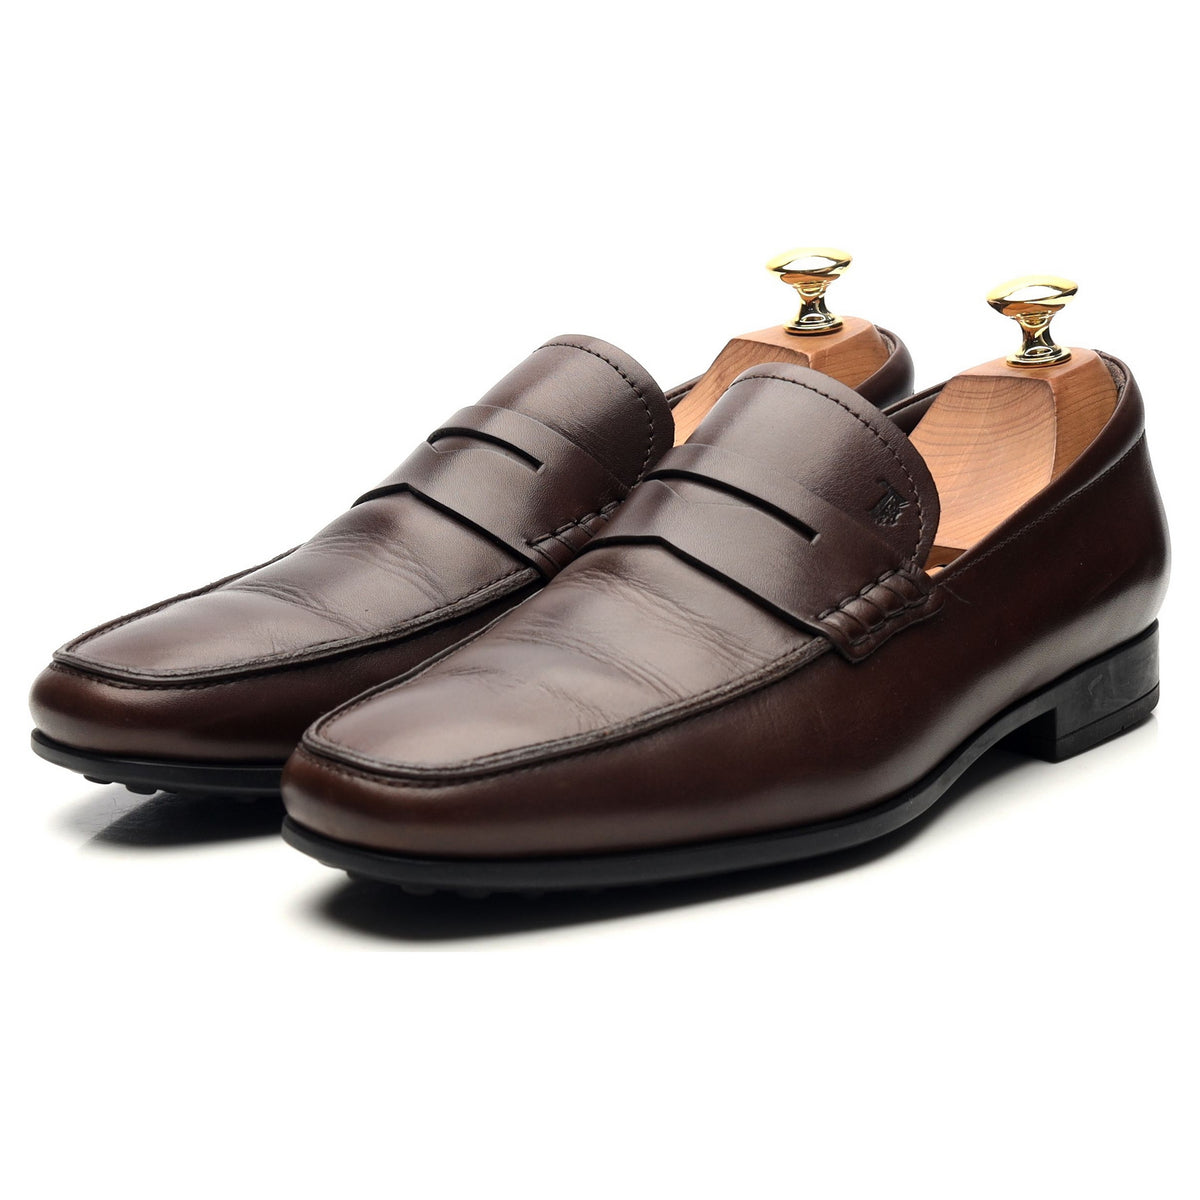 Dark Brown Leather Loafers UK 6